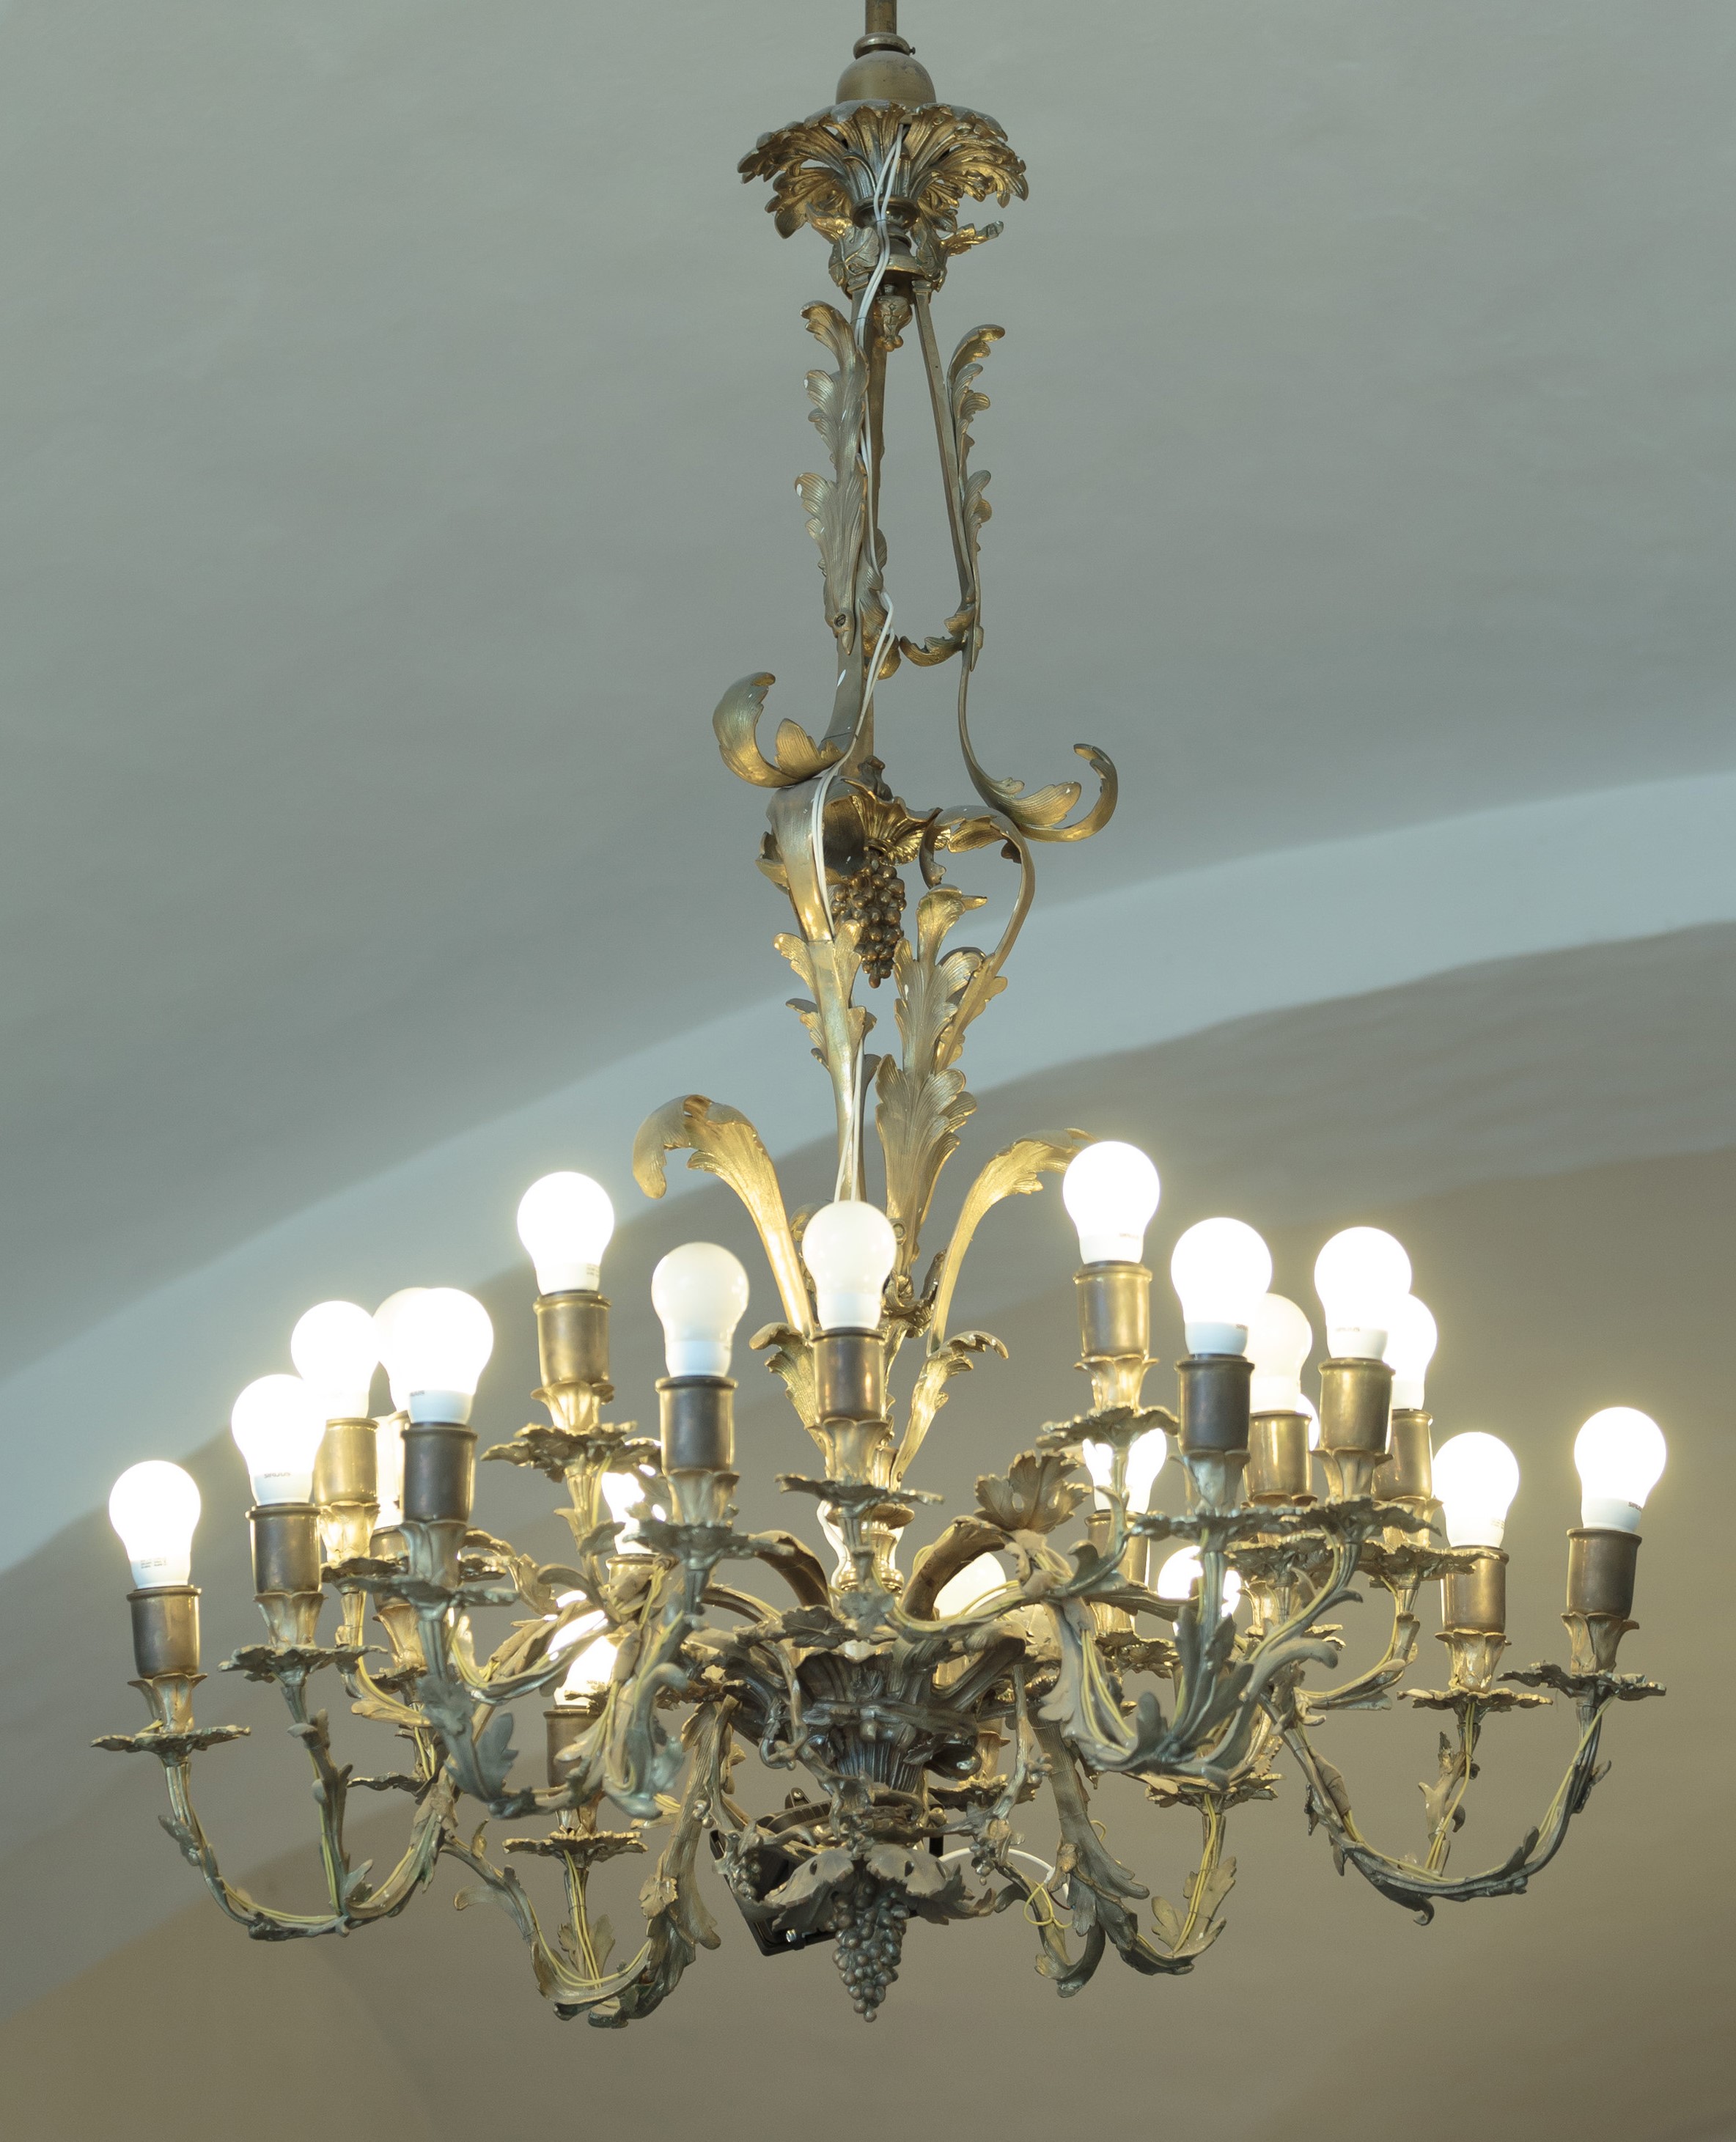 Chandelier, 1750–1774, National Museum of Lithuania, IM-4620. Photo by Tomas Kapočius, 2017